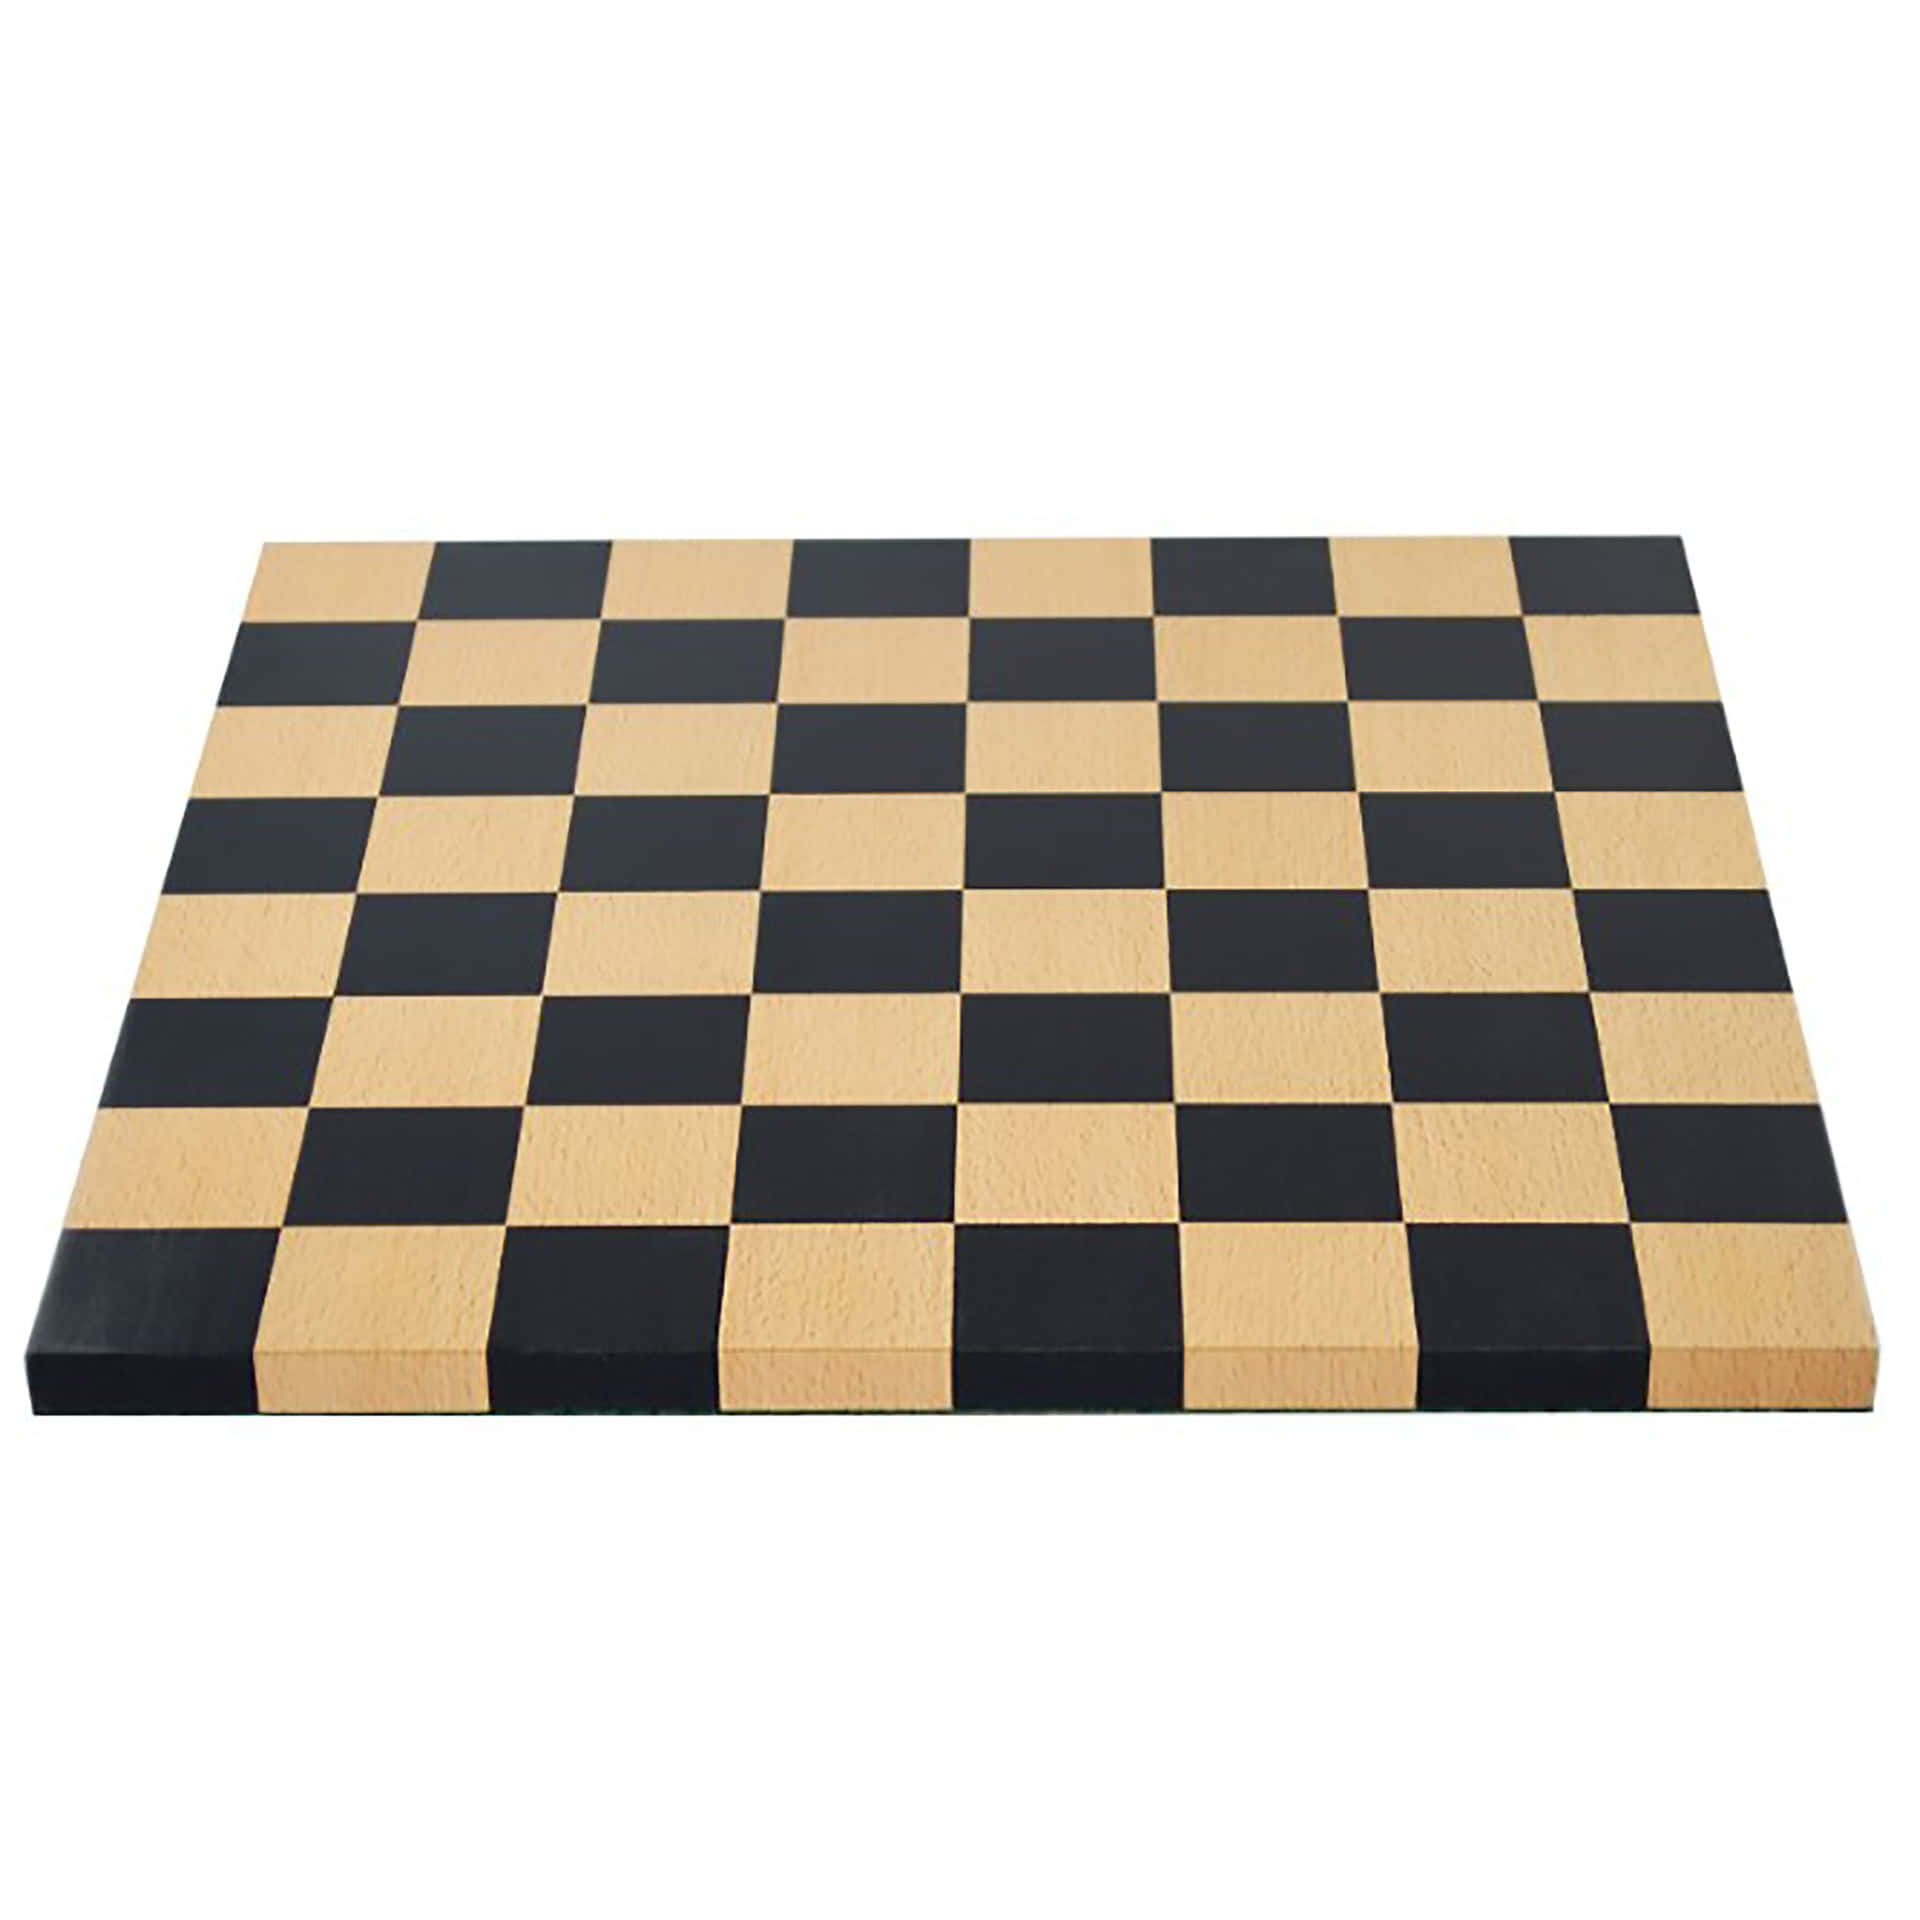 Strategizing On A Chessboard Background